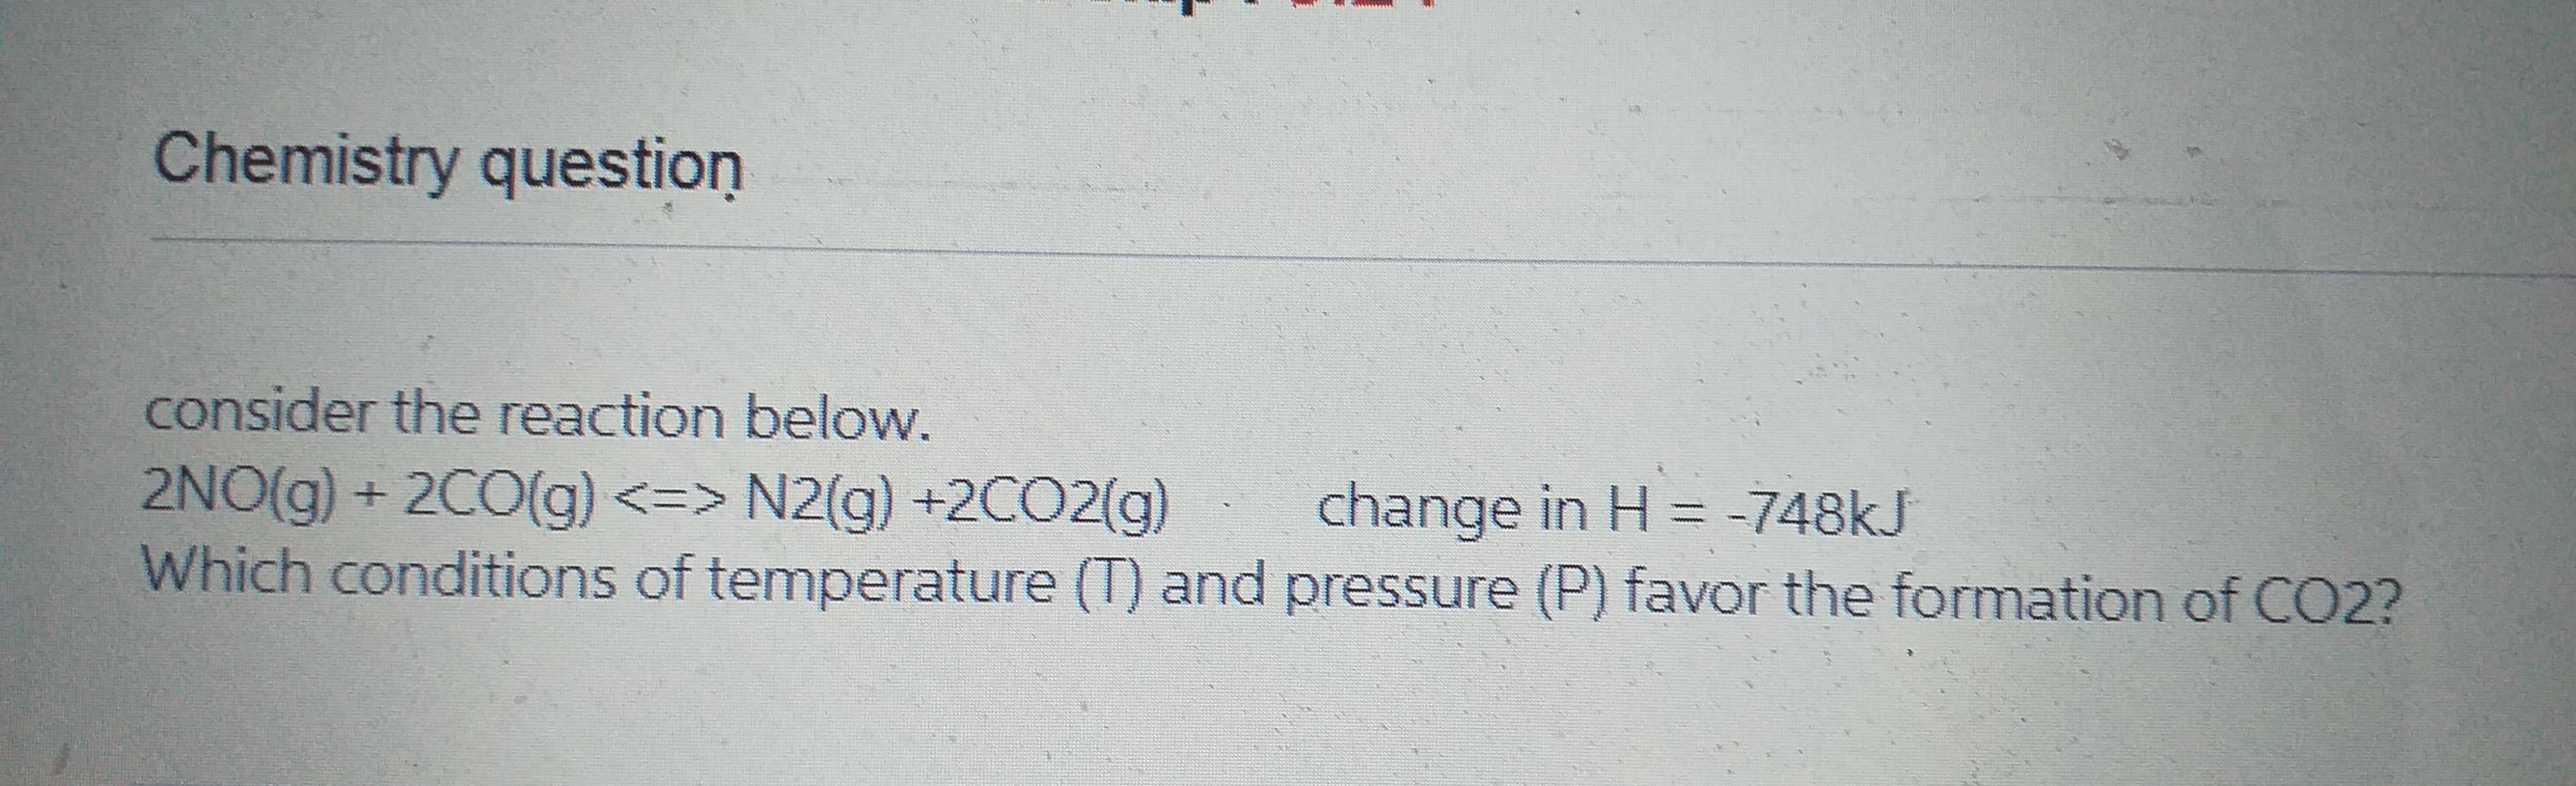 Chemistry question
consider the reaction below.
2NO(g) + 2CO(g) <=> N2(g) +2CO2(g)
Which conditions of temperature (T) and pressure (P) favor the formation of CO2?
change in H = -748kJ
